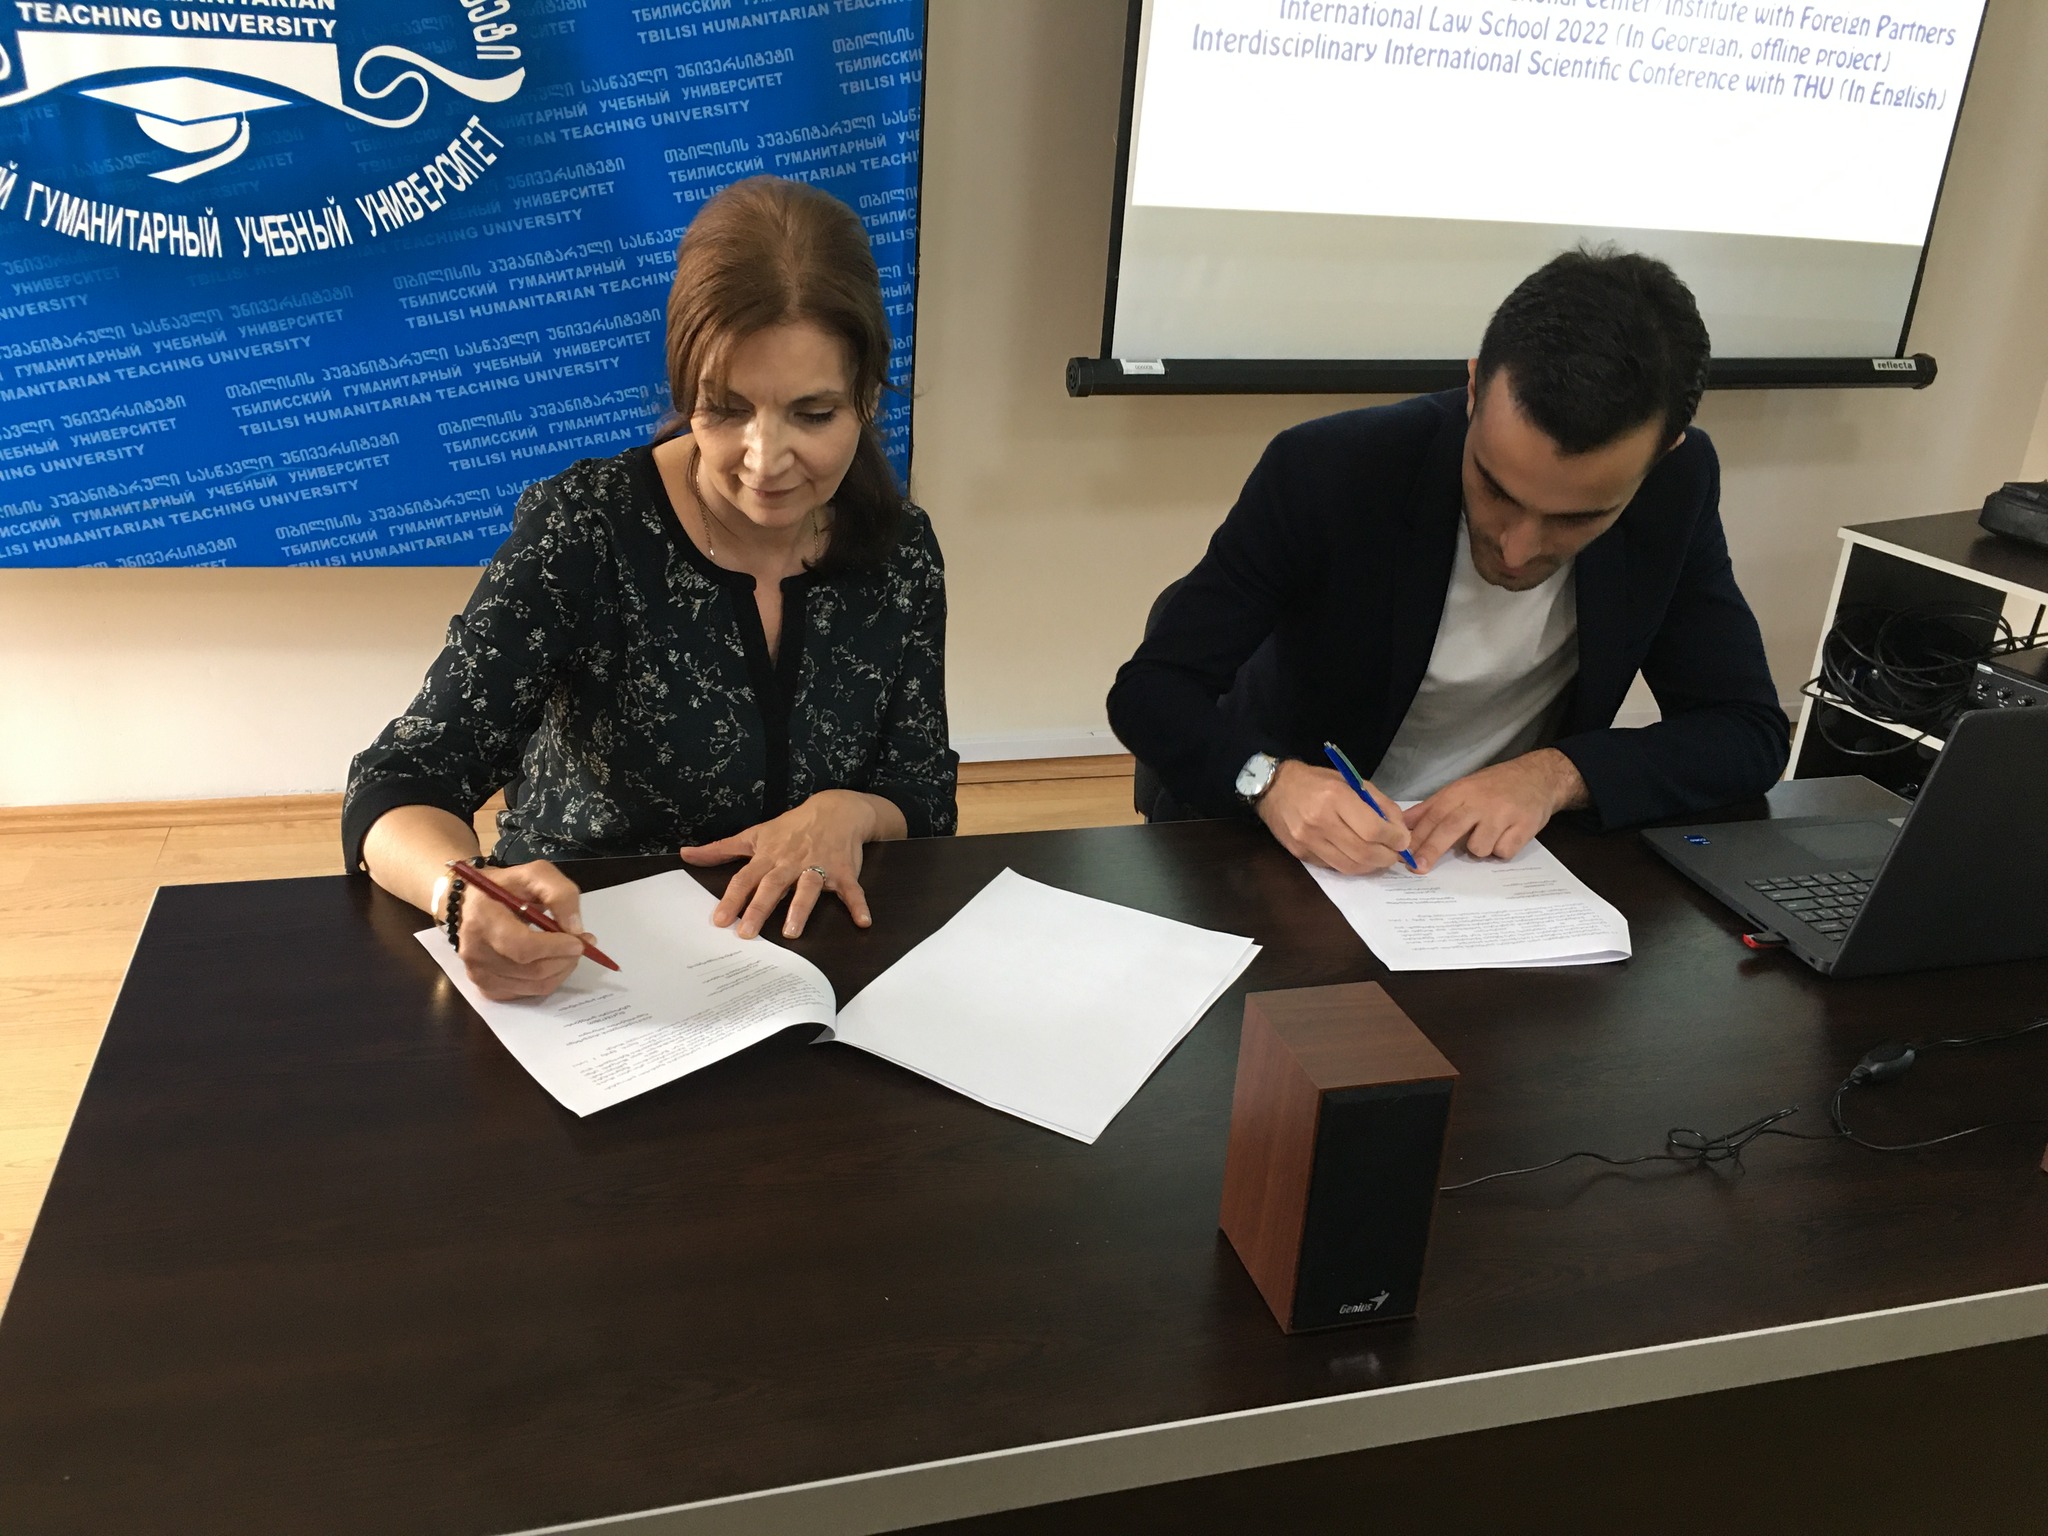 A Memorandum of Understanding was signed between the Georgian Young Reformers’ Association (GYRA) and the Tbilisi Humanitarian University (THU).